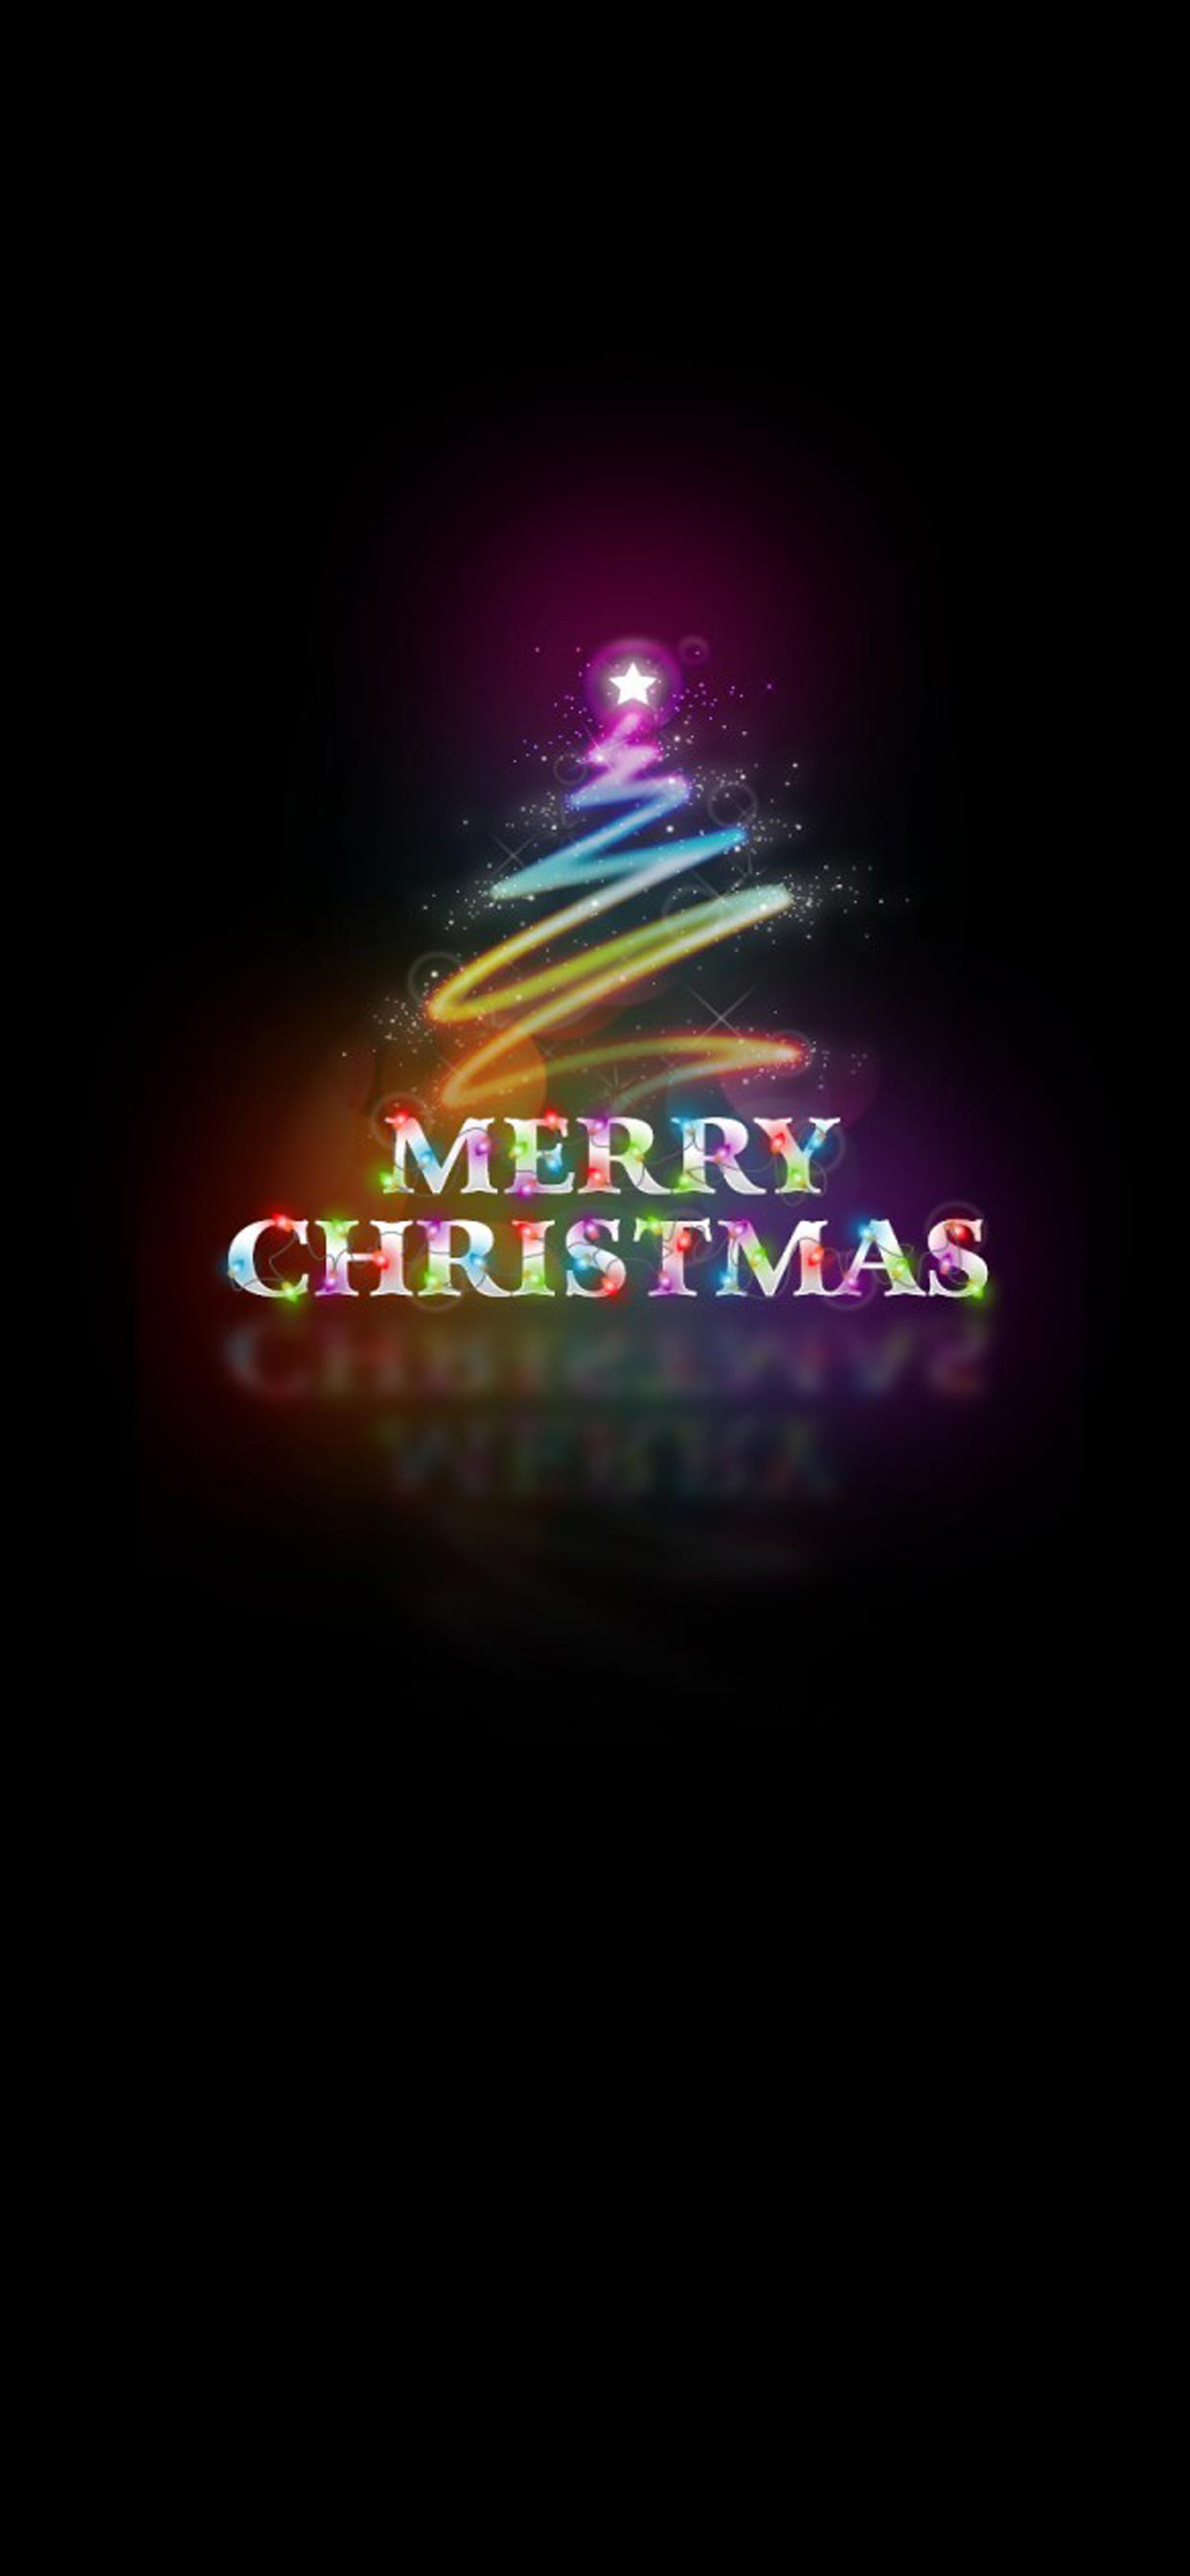 Merry Christmas Background 4K Wallpaper iPhone HD Phone #8310h